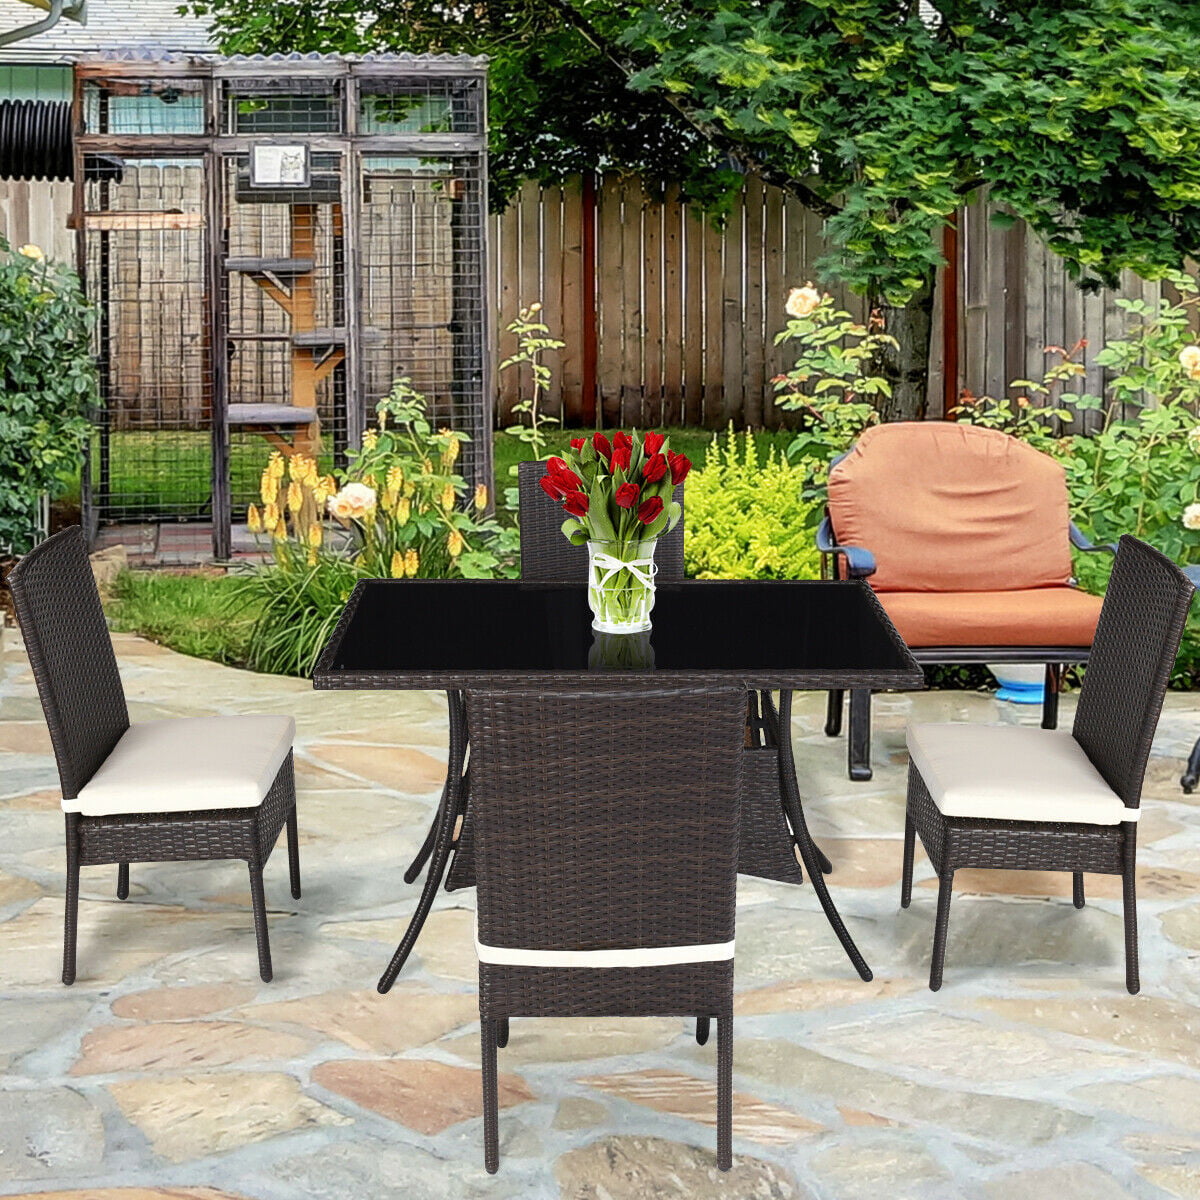 Rattan Wicker Brown 5 Piece Outdoor Patio Table and Chairs Dining Furniture Set 